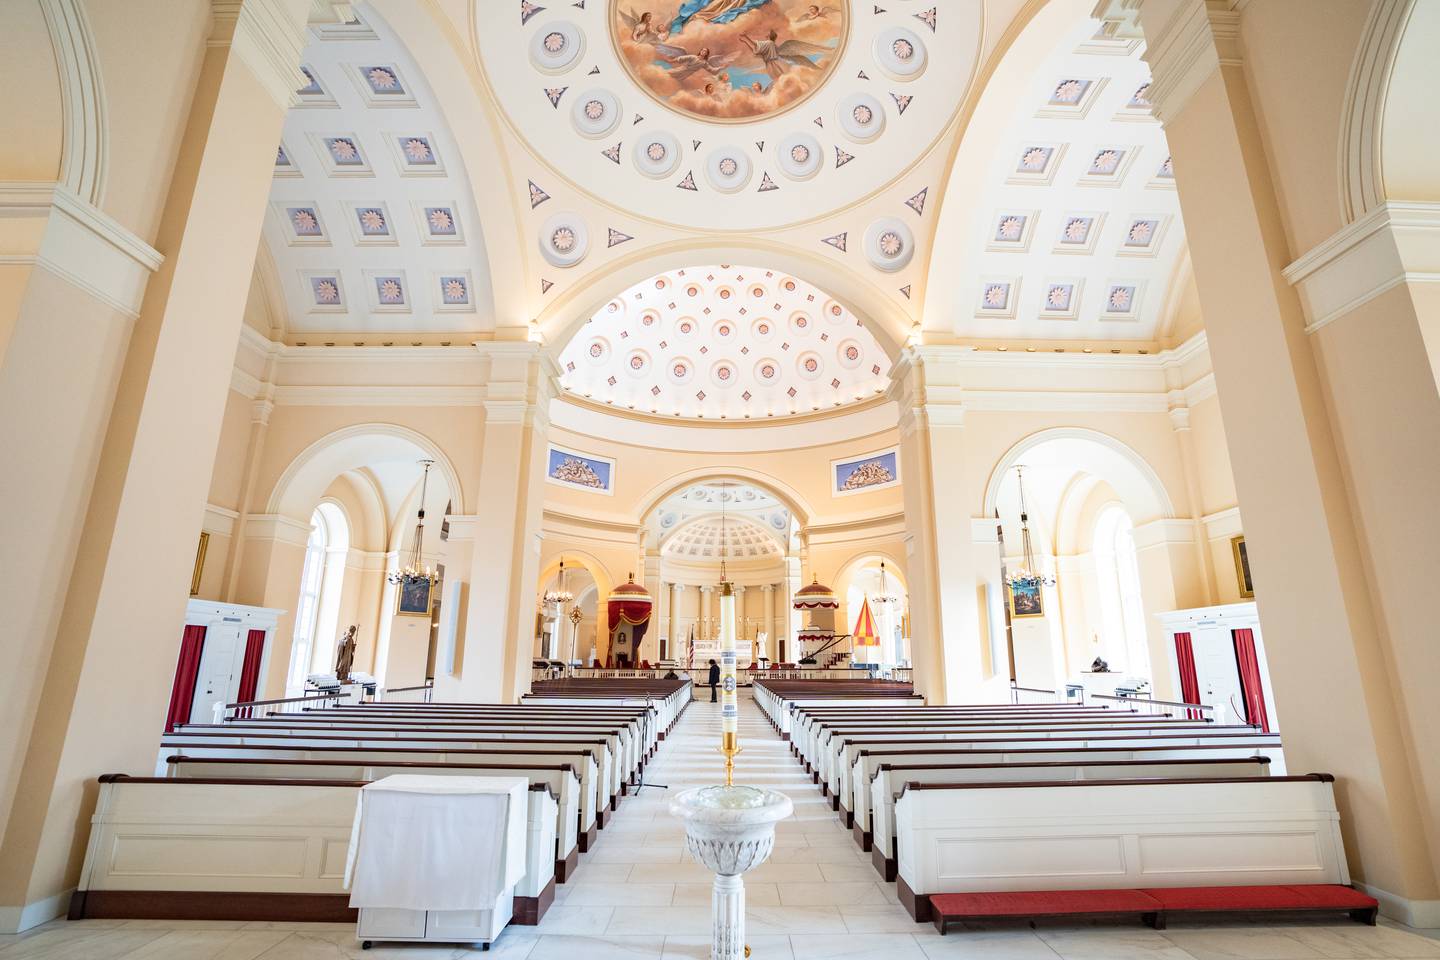 The sanctuary of the Baltimore Basilica on December 2, 2022. The actual name of the Basilica is The Basilica of the National Shrine of the Assumption of the Blessed Virgin Mary.